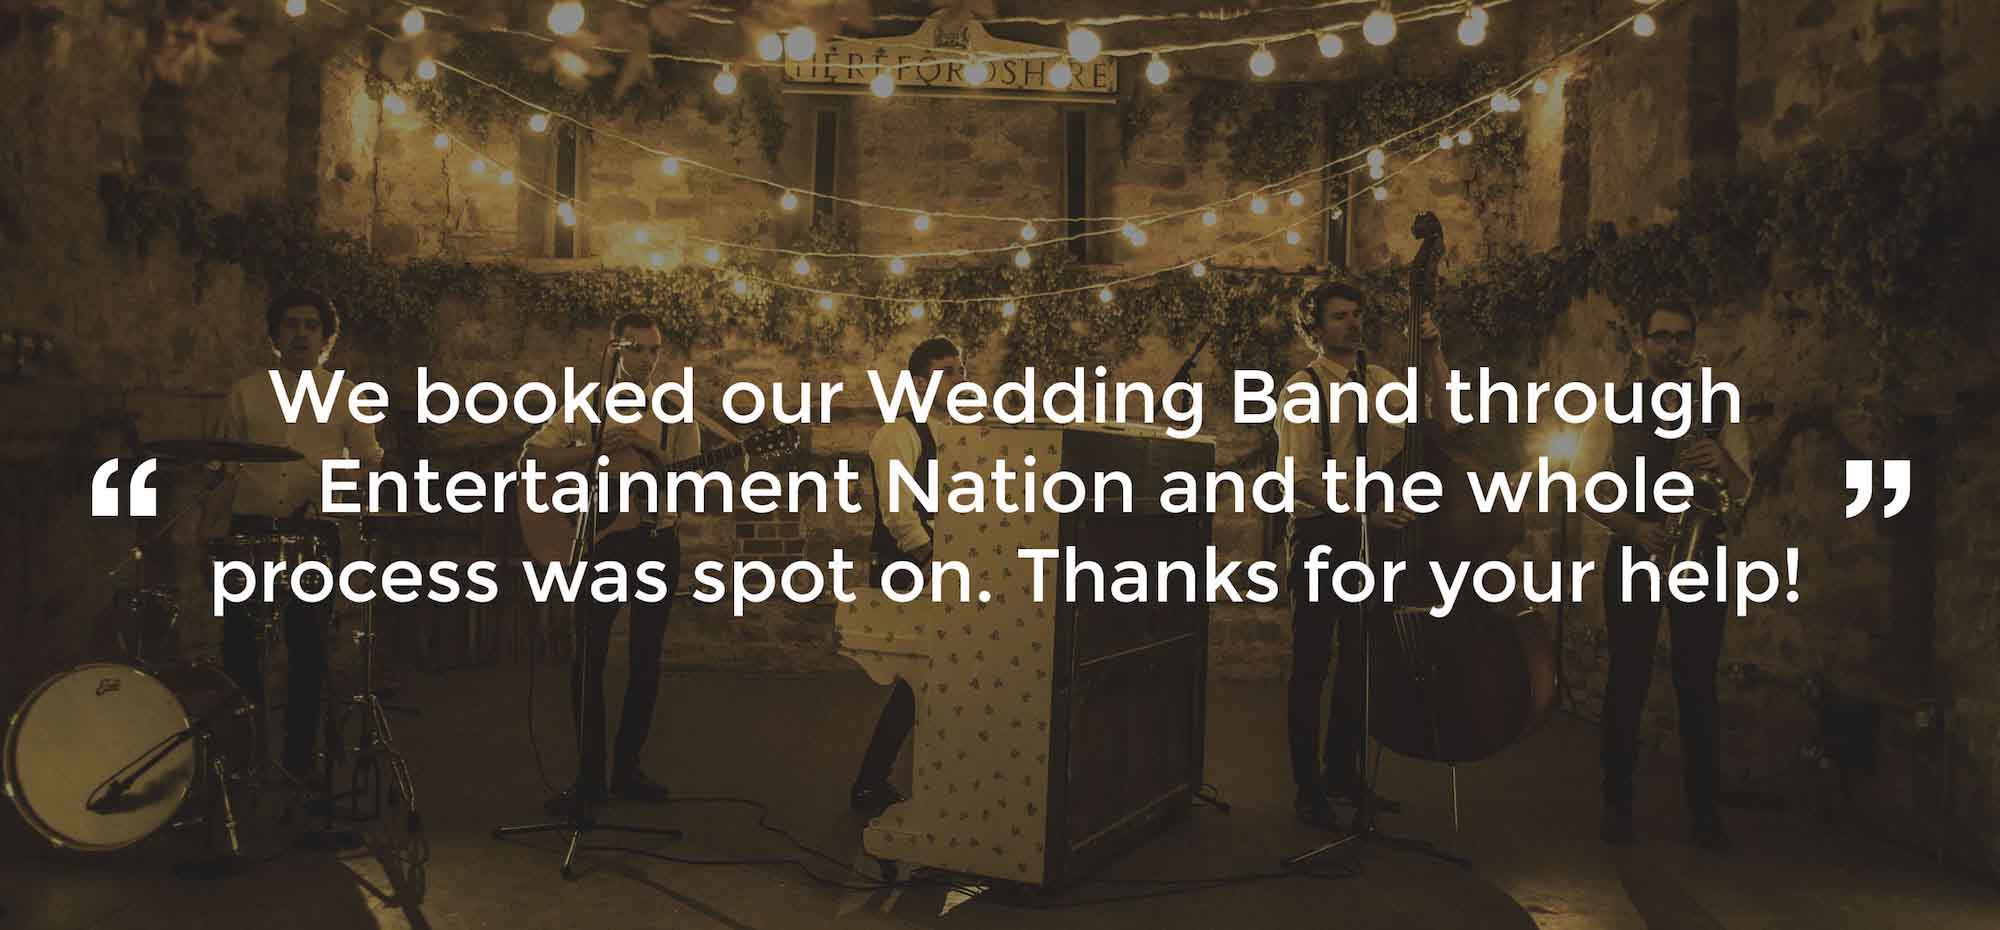 Client Review of a Wedding Band Derbyshire